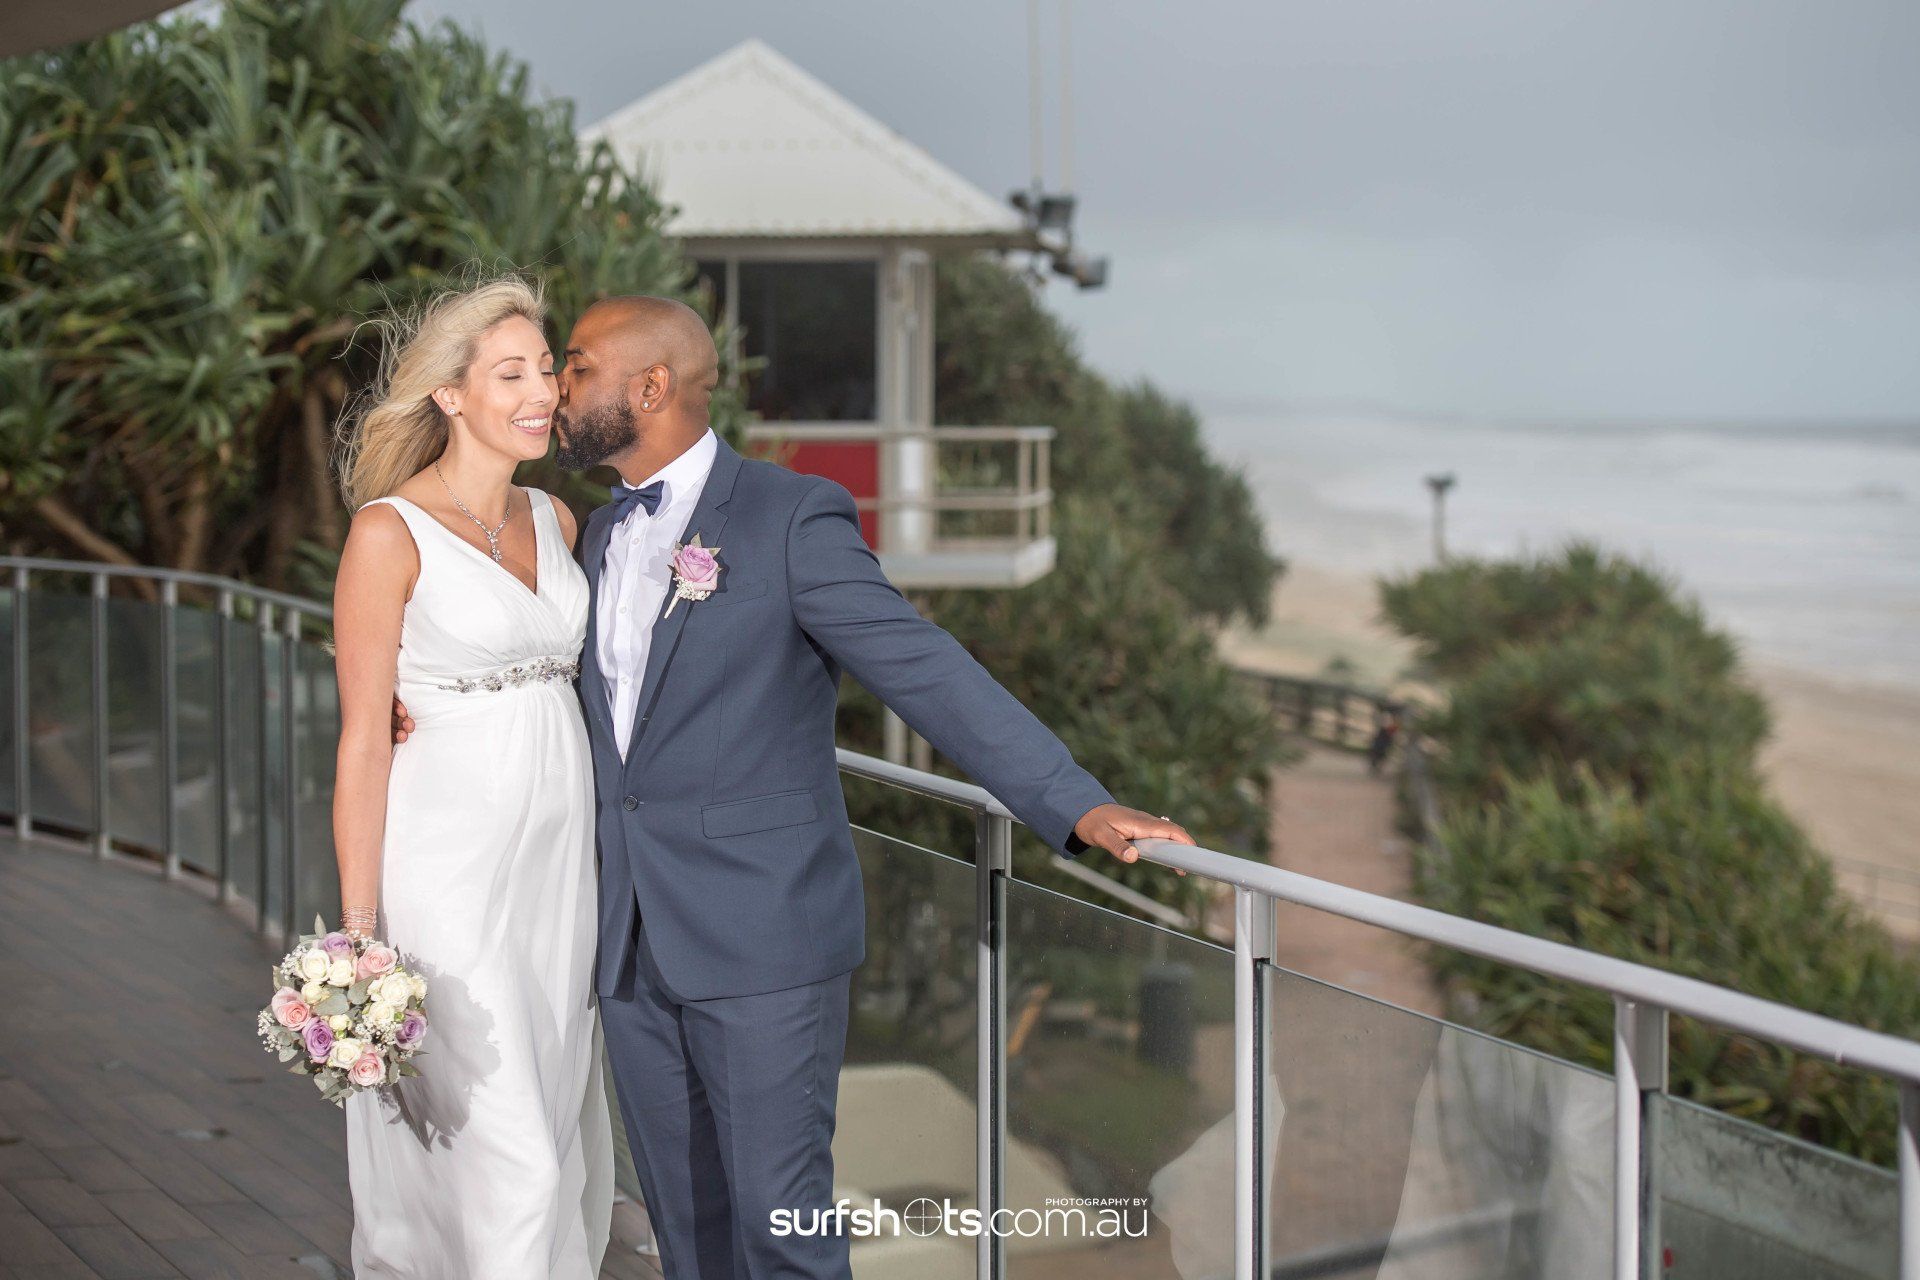 dark skinned groom kissing new wife on cheek after wedding, bride in white with pink flowers, on the deck at Coolum Surf Club with moody skies behind